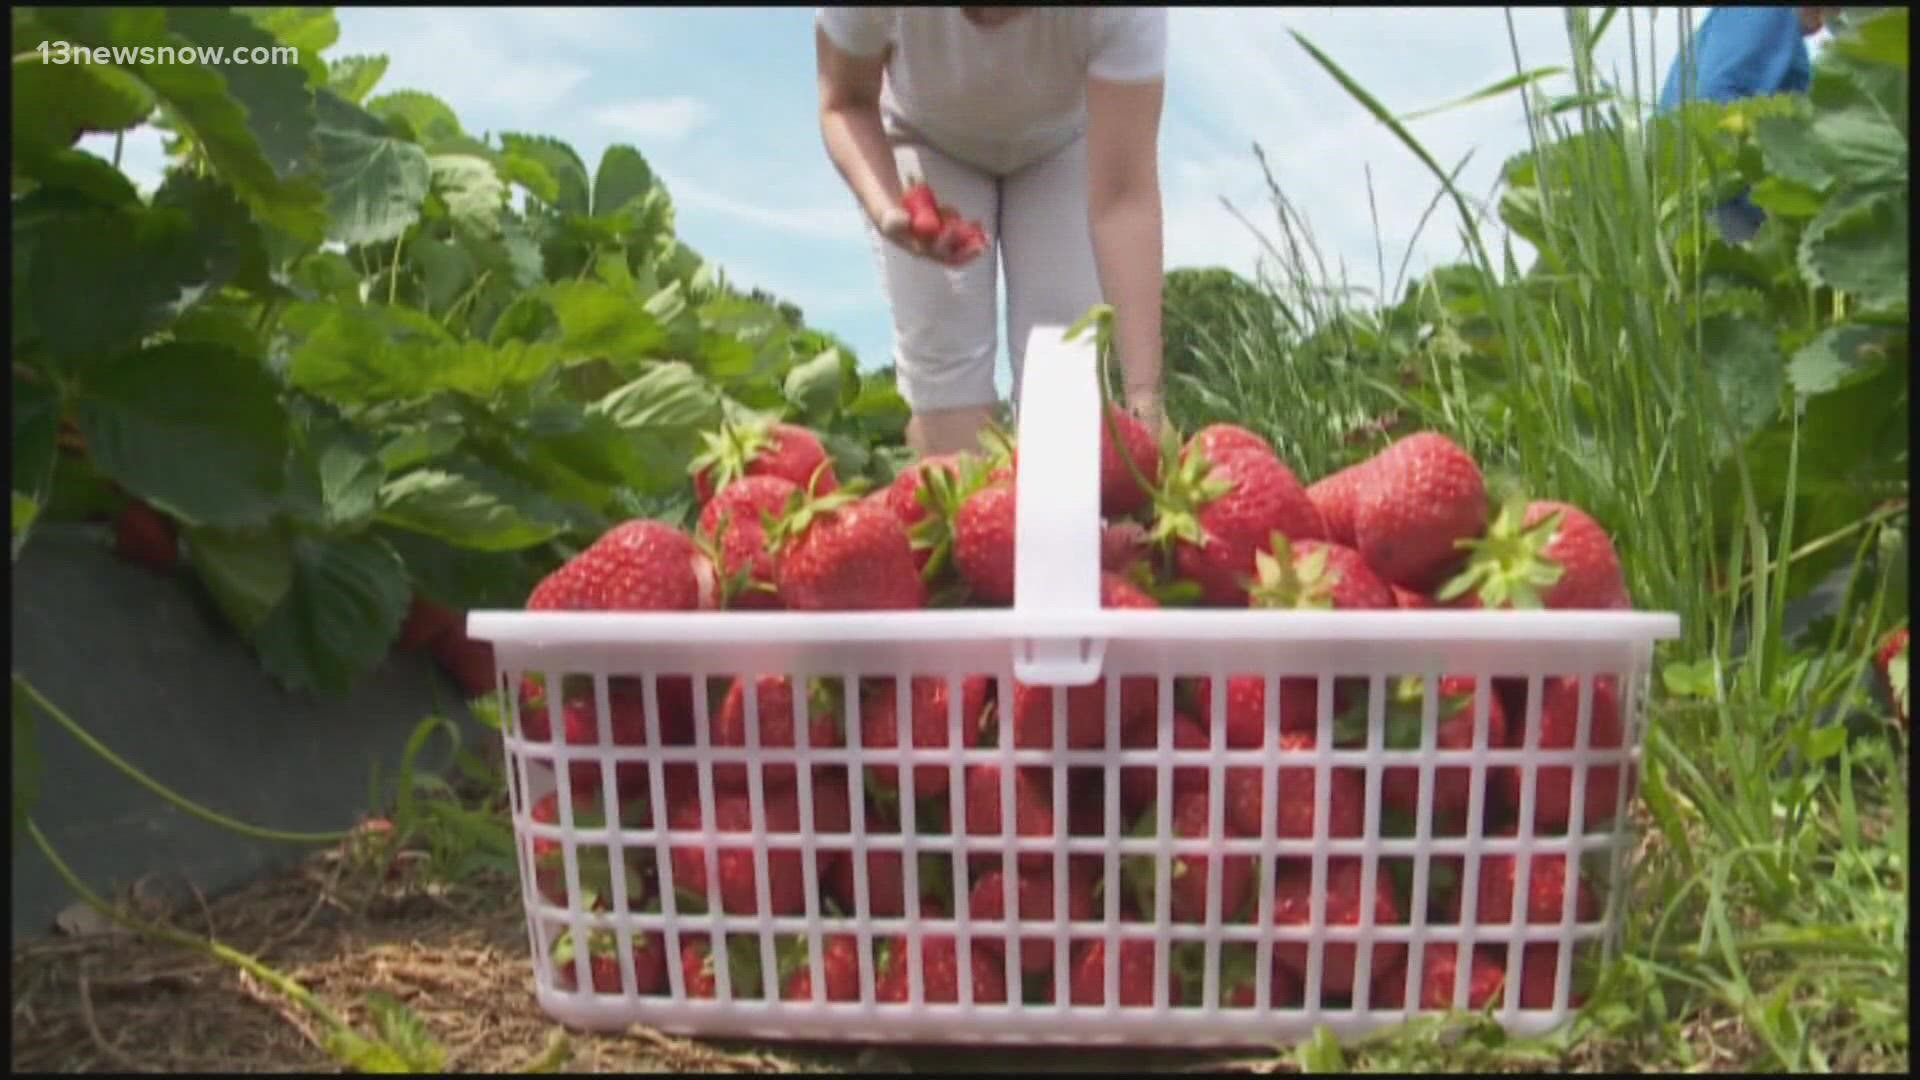 Many people may not know this but strawberries are a pretty big deal for Hampton Roads, specifically Virginia Beach.